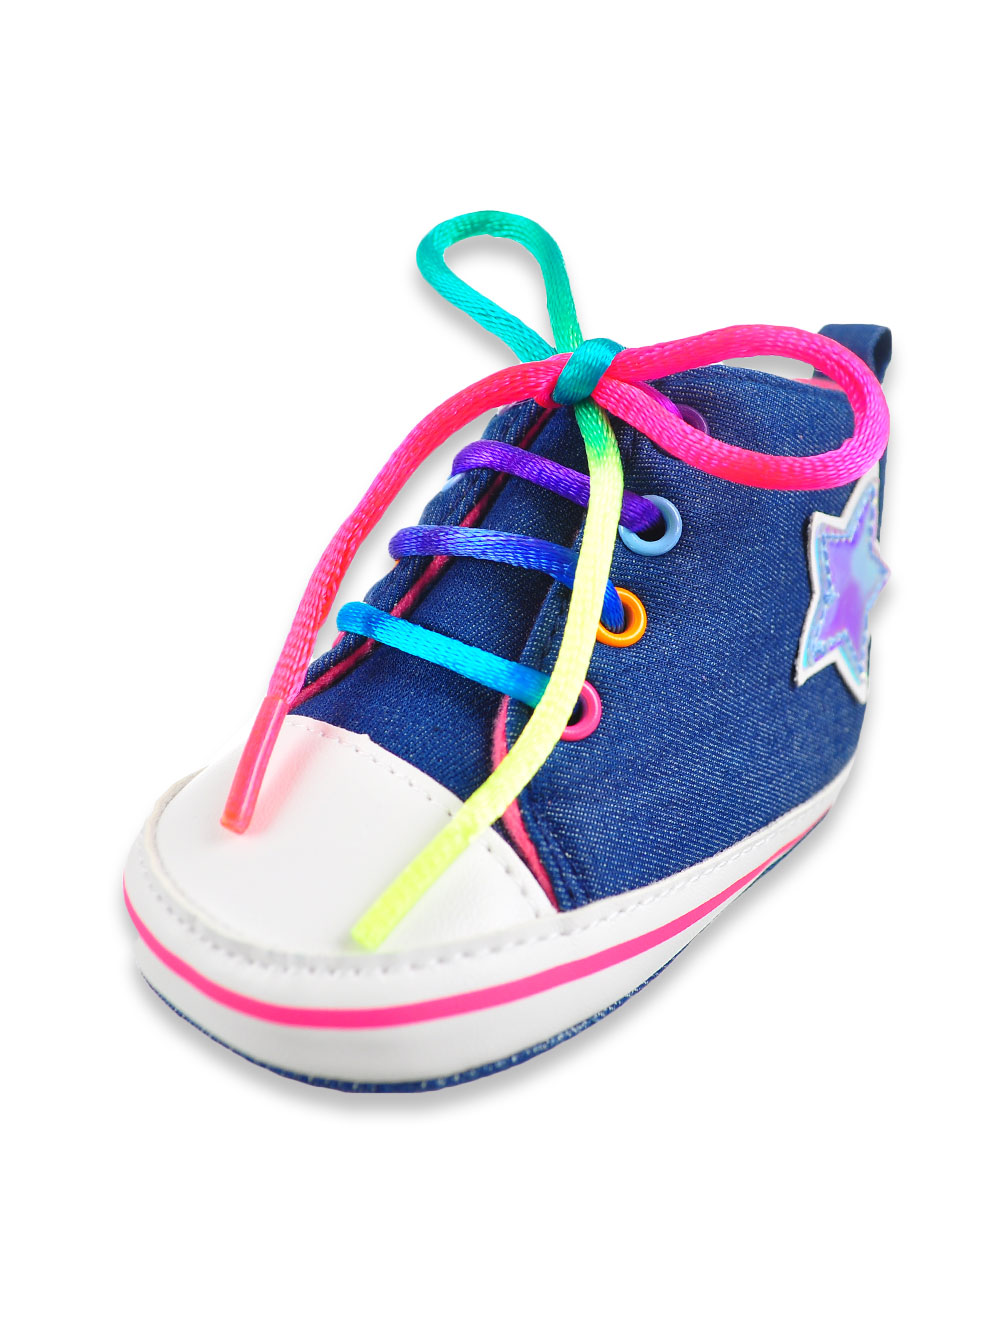 rising star baby girl shoes